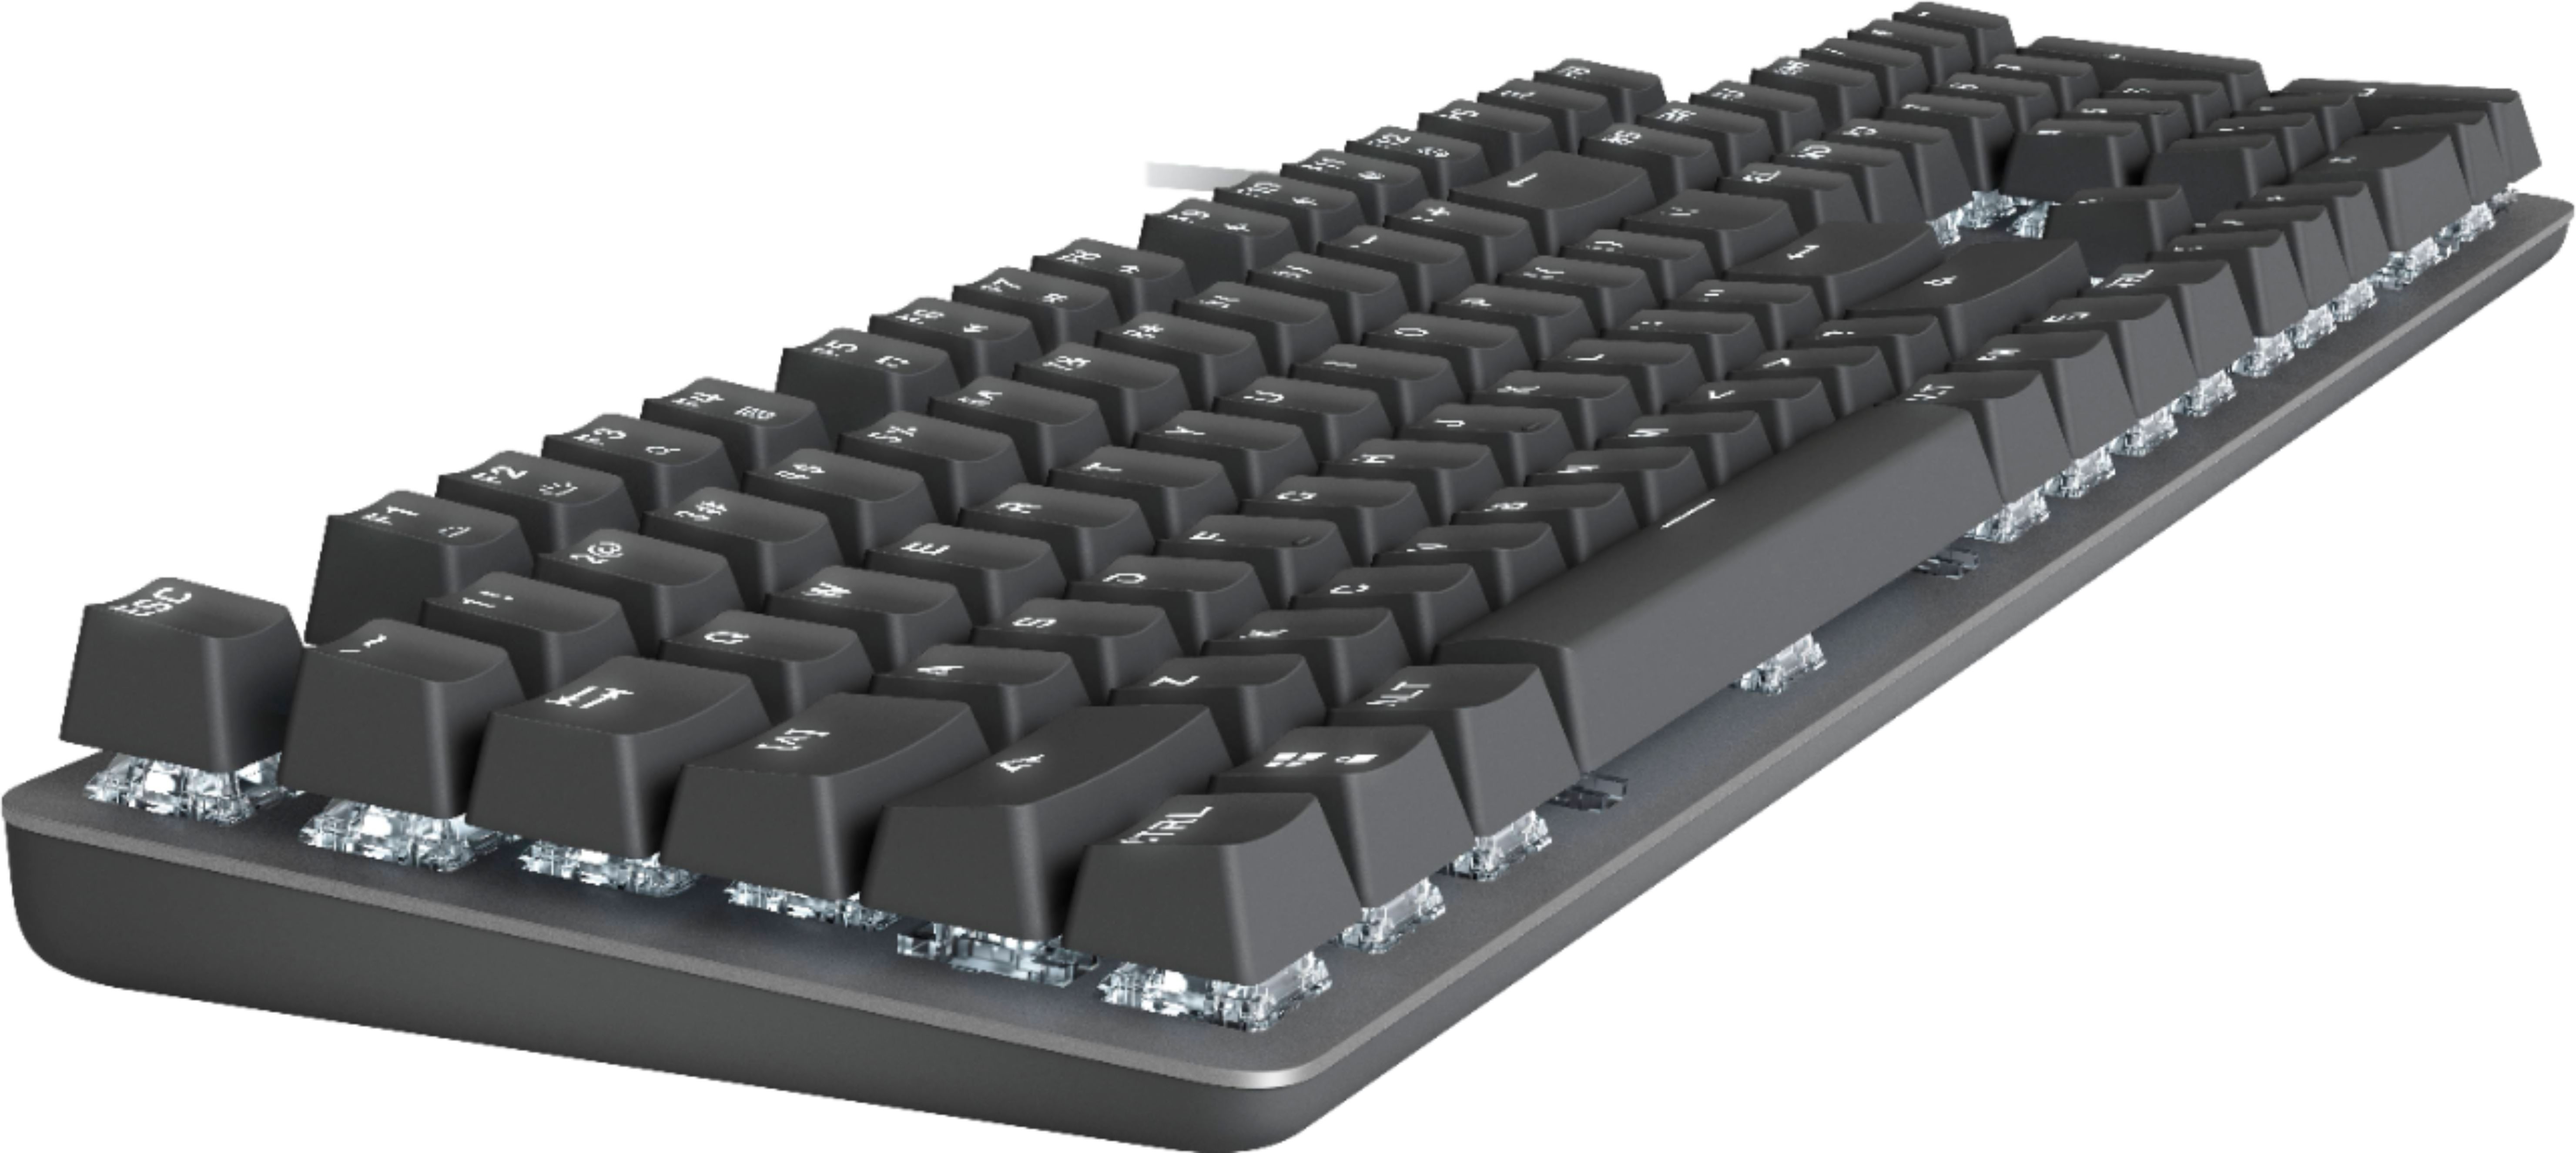 Angle View: Logitech - K845 Full-size Wired Mechanical Clicky Keyboard - Graphite